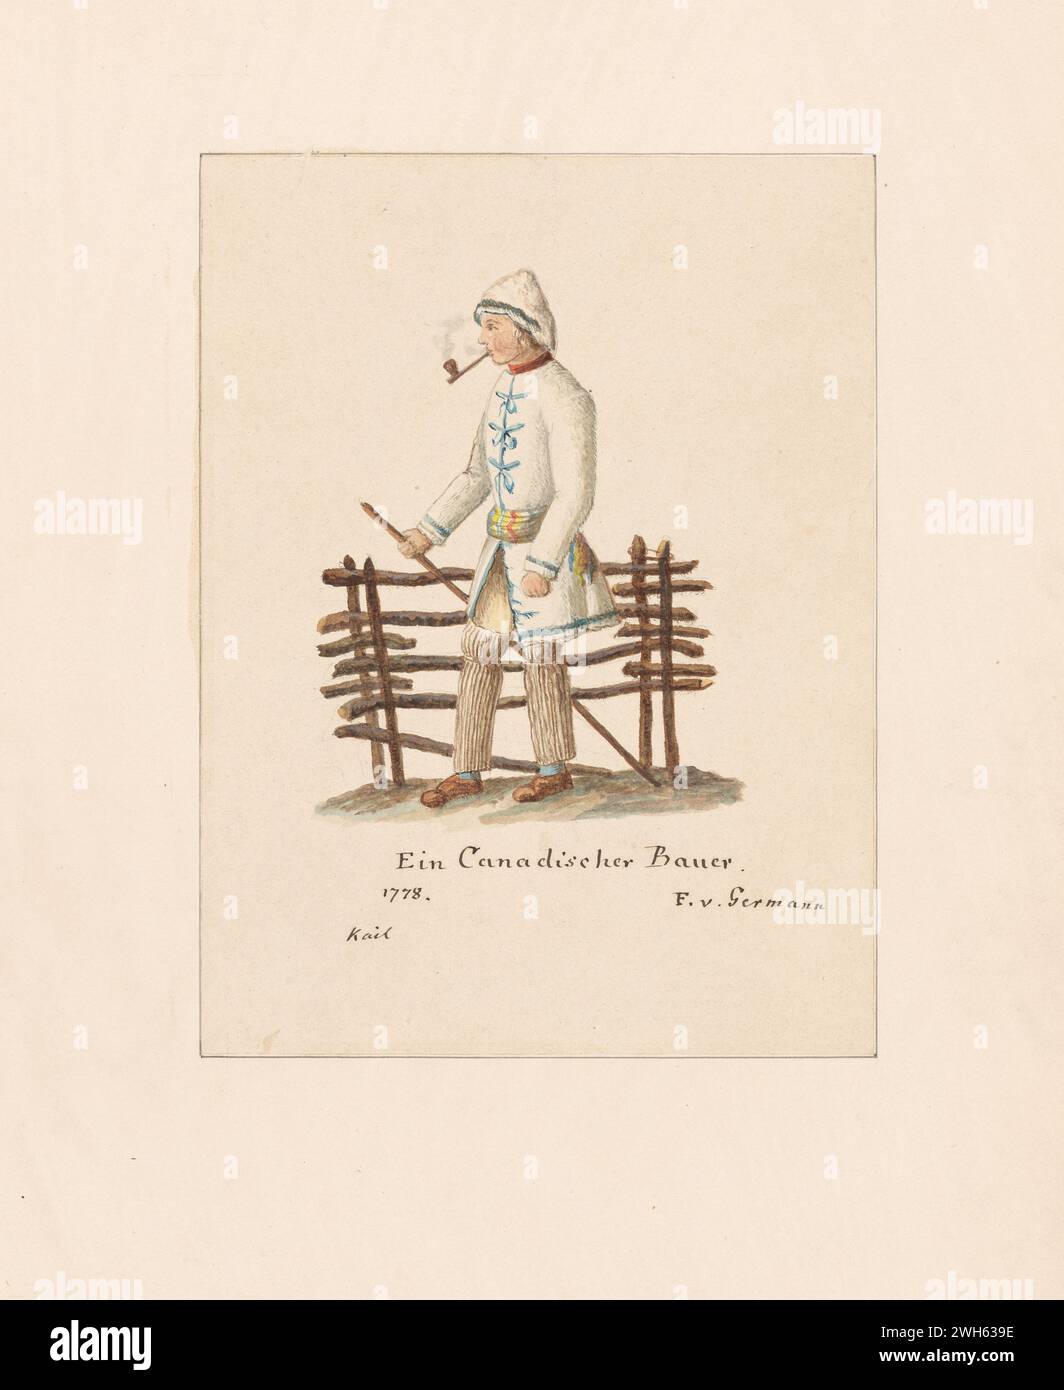 “Watercolor of a Canadian peasant/farmer in period winter clothing”  circa 1778.   From a series of prints by Friedrich von German captain of a regiment from Hesse-Hanau, one of the many German auxiliary troops hired by George III to fight in the American Revolution. He arrived in North America in 1775 During the war, he painted a series of watercolors of American, British, and German soldiers. Stock Photo